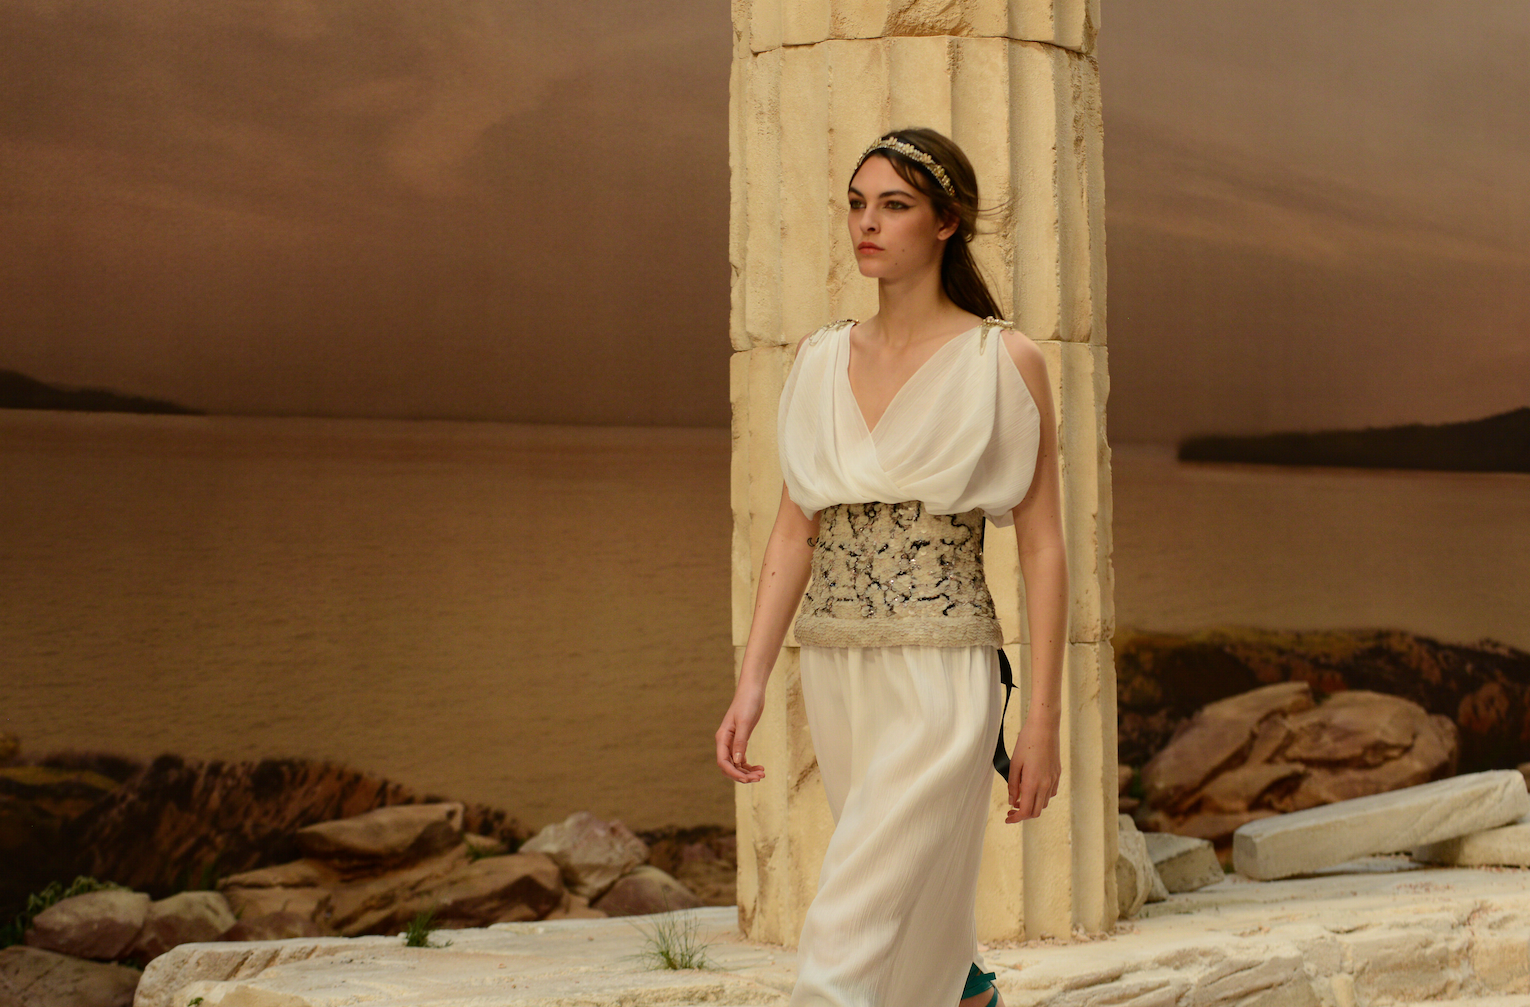 CHANEL CRUISE COLLECTION 17/18 – THE MODERNITY OF ANTIQUITY